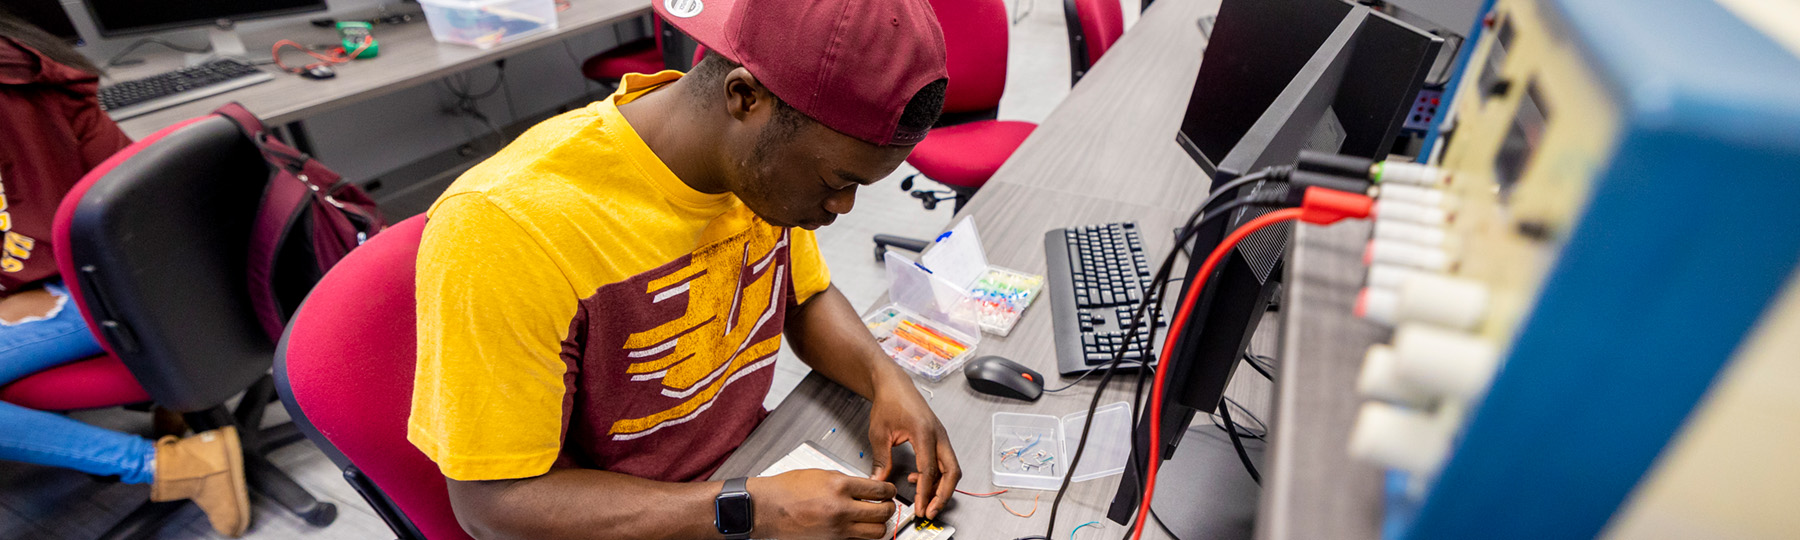 Electrical Engineering student in a CMU shirt and hat working on a circuit board in front of electrical equipment.